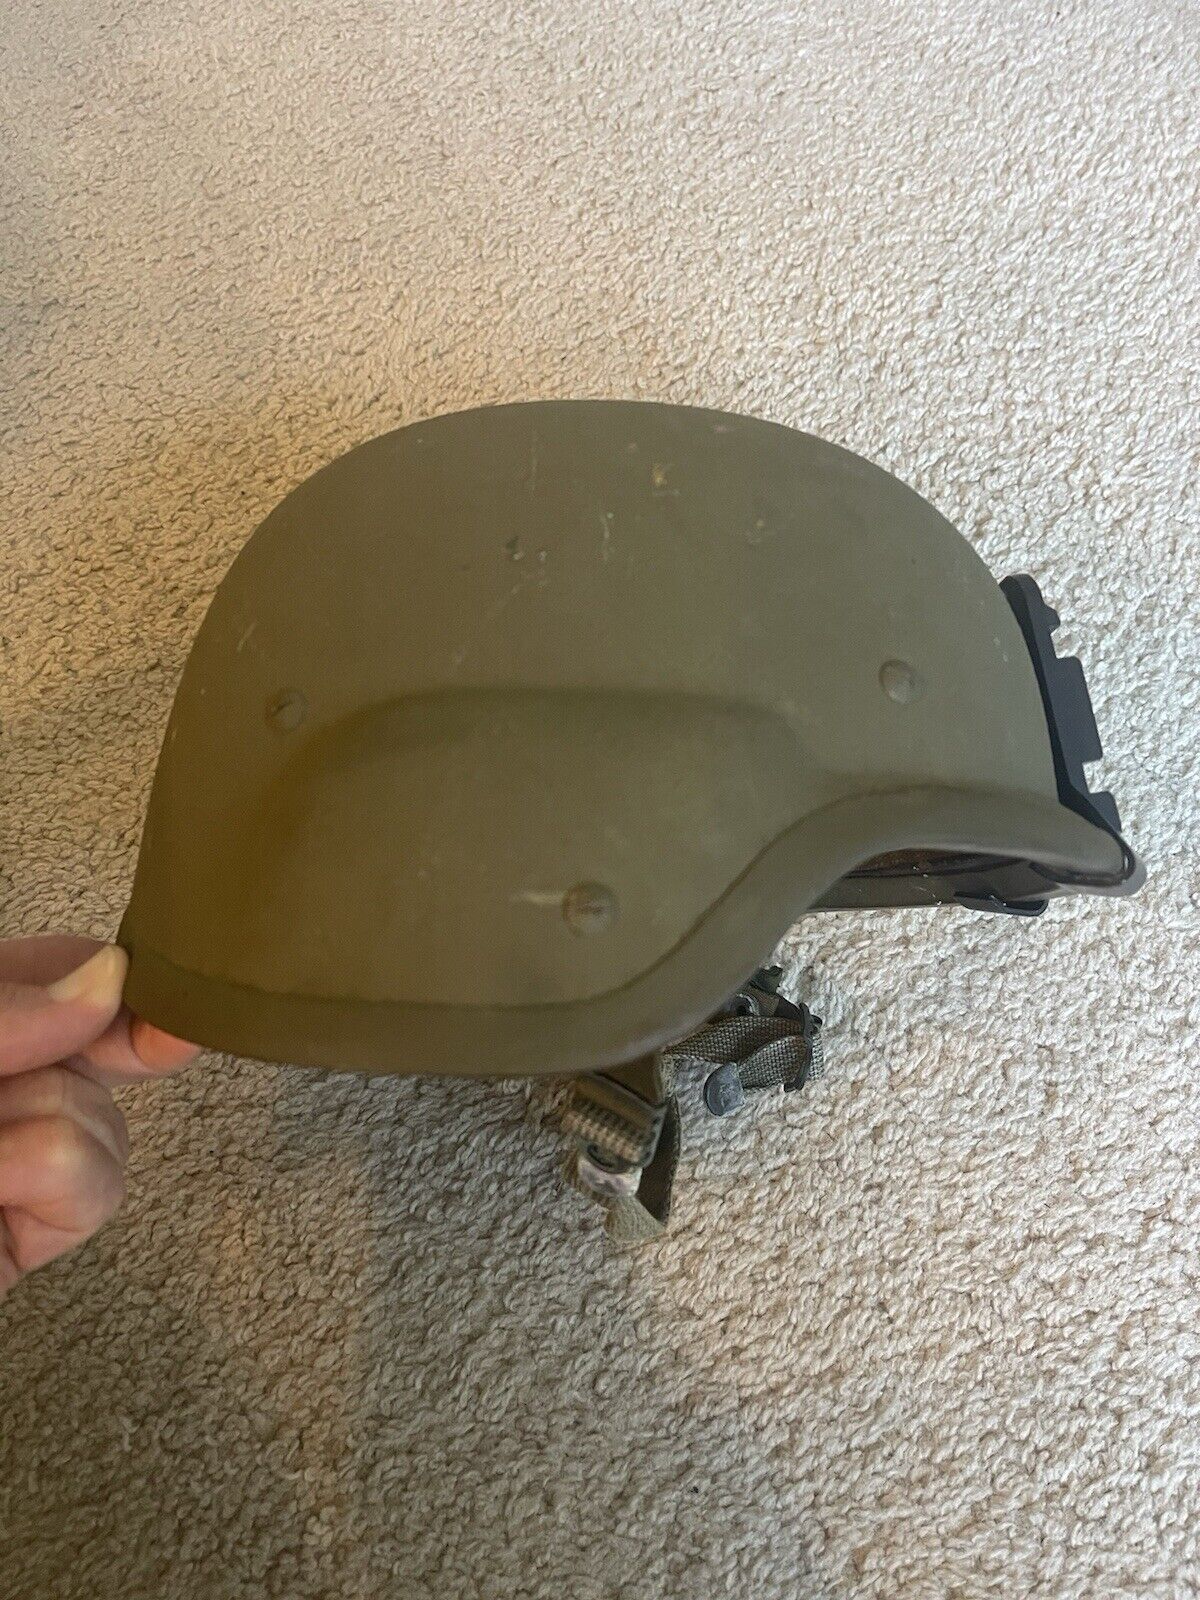 Vintage US ARMY MILITARY PASGT Made With KEVLAR HELMET, Small S-1, OD Green